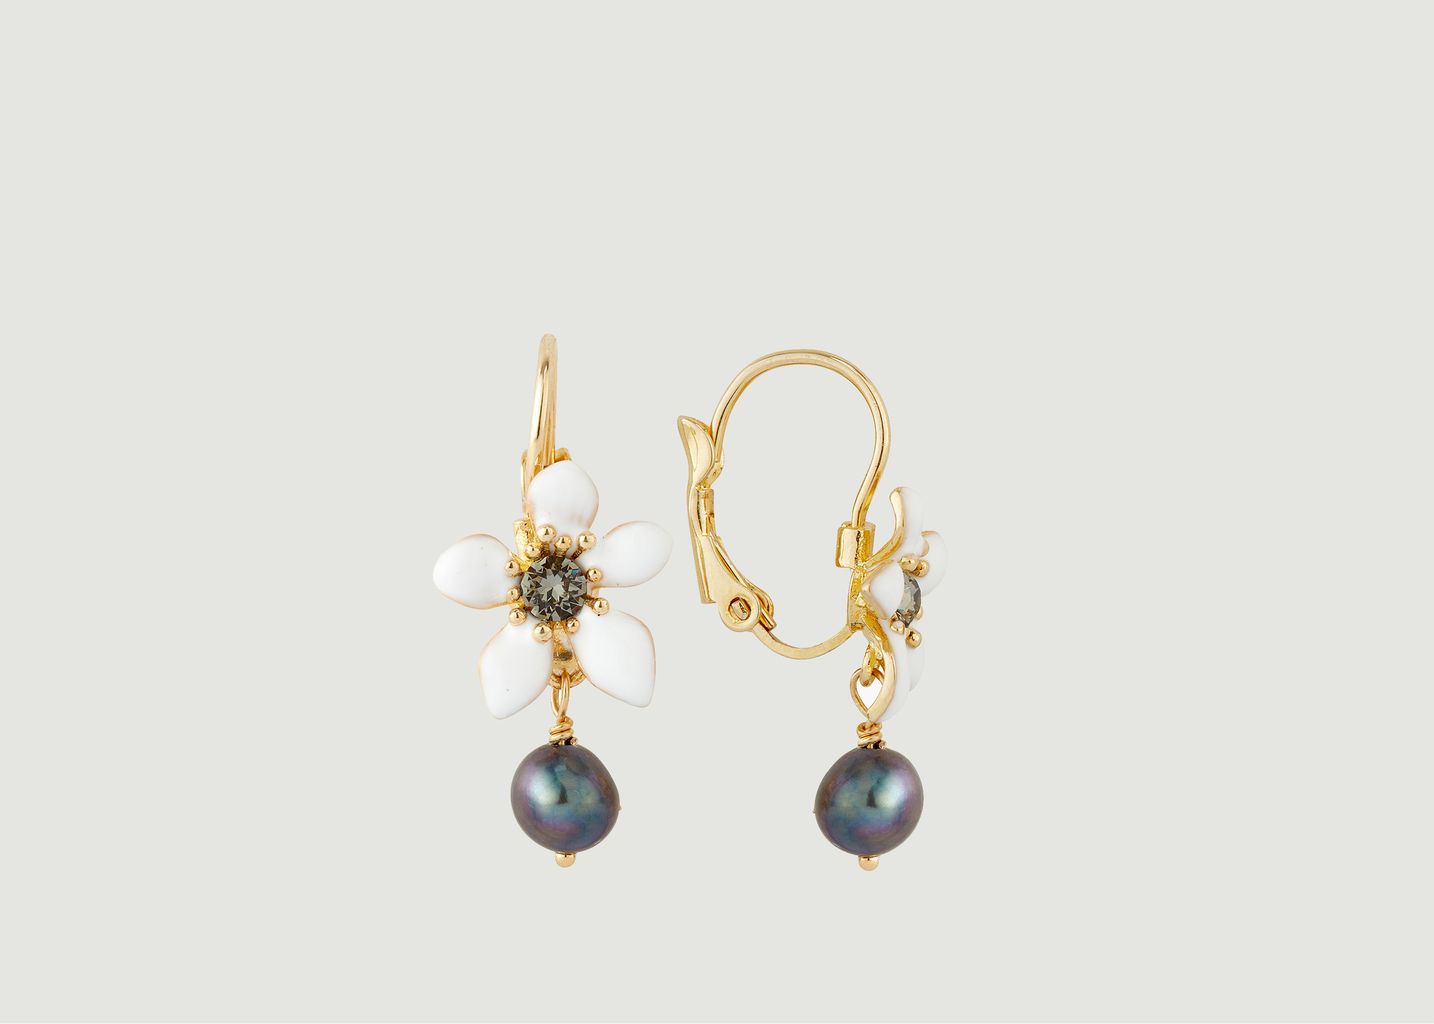 Buttercup and cultured pearl sleeper earrings - Les Néréides